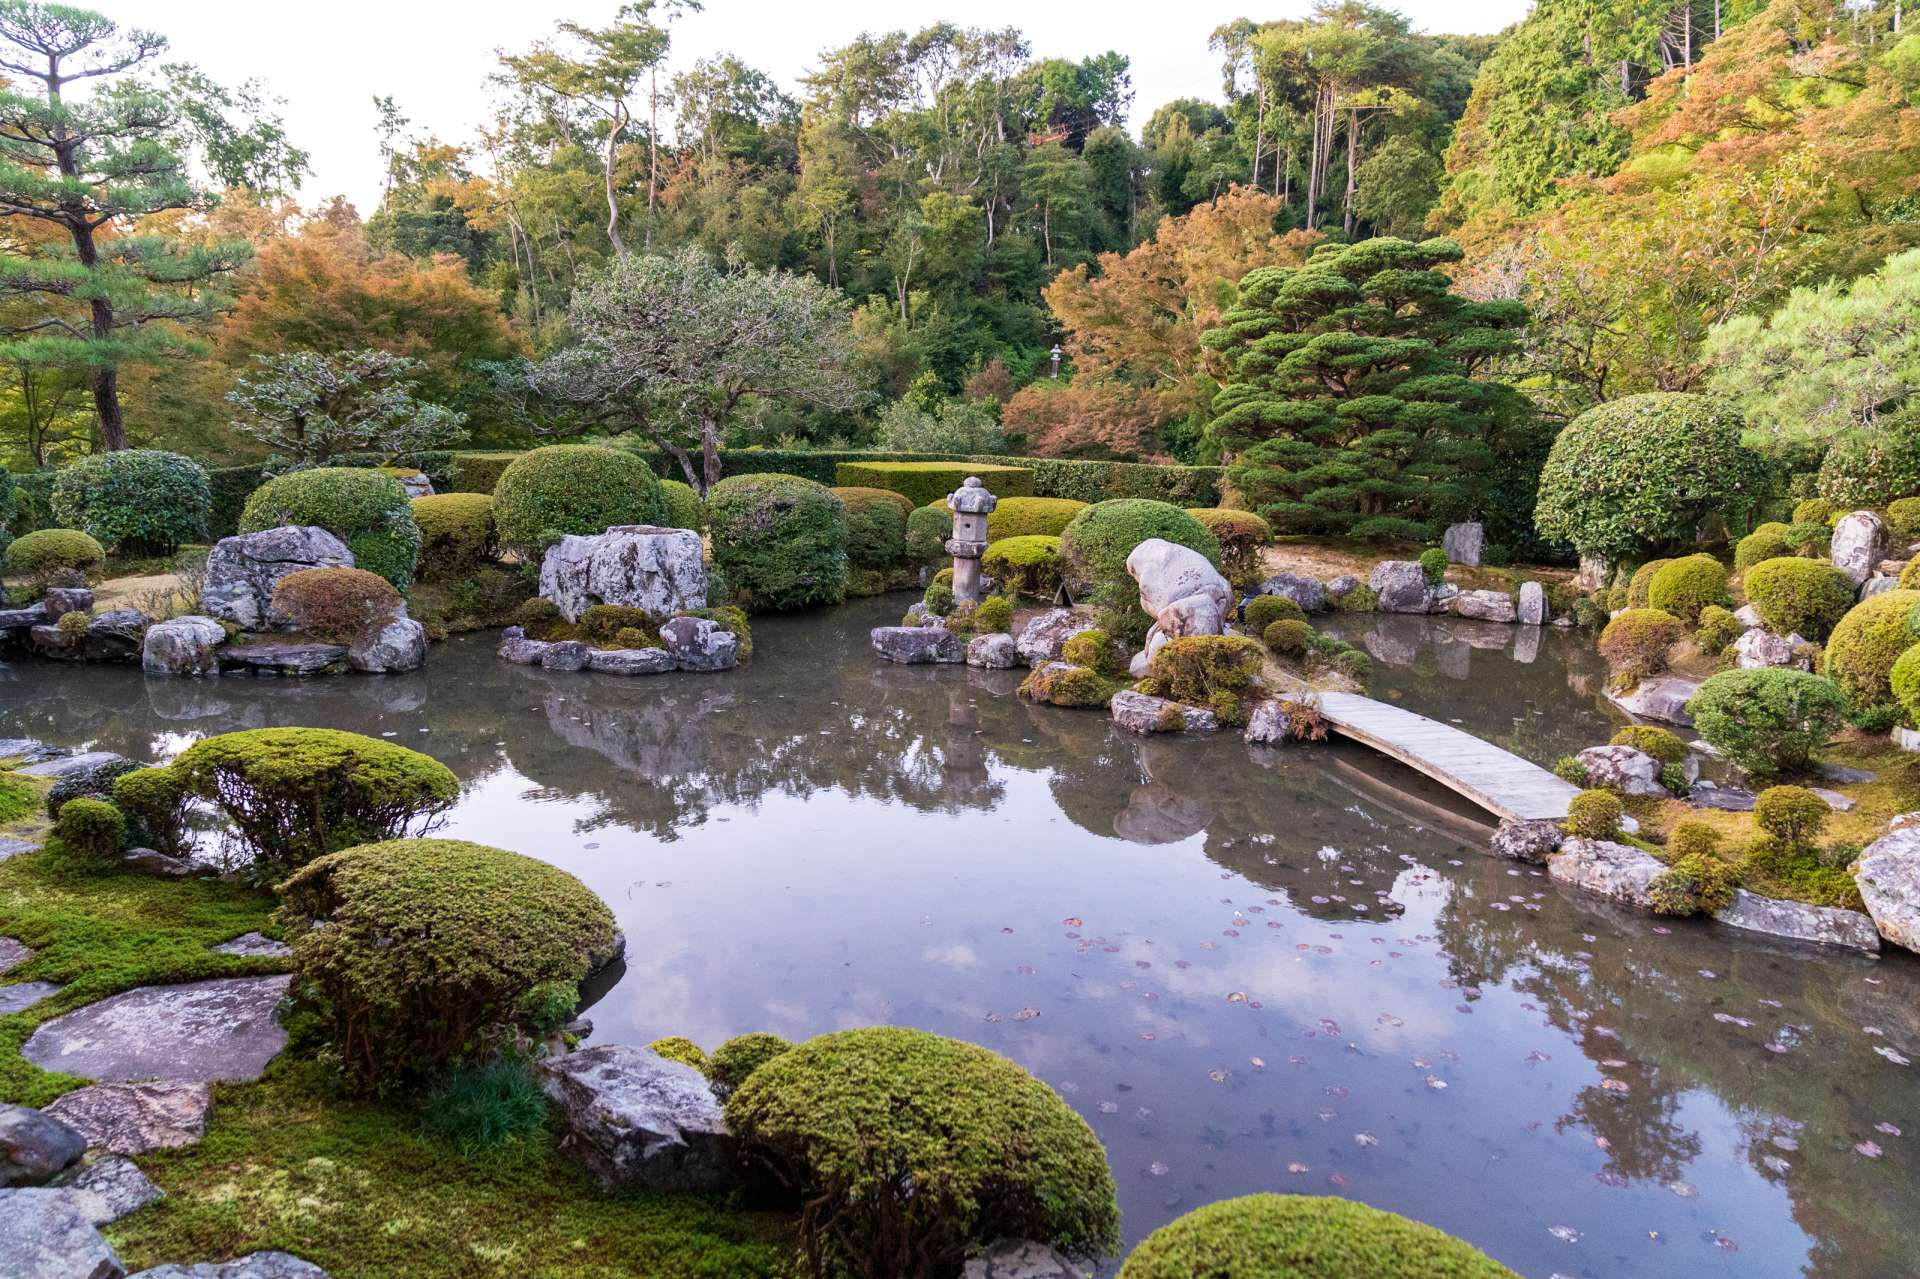 Sitting on the veranda at Jojuin and admiring one of the finest gardens in Japan.